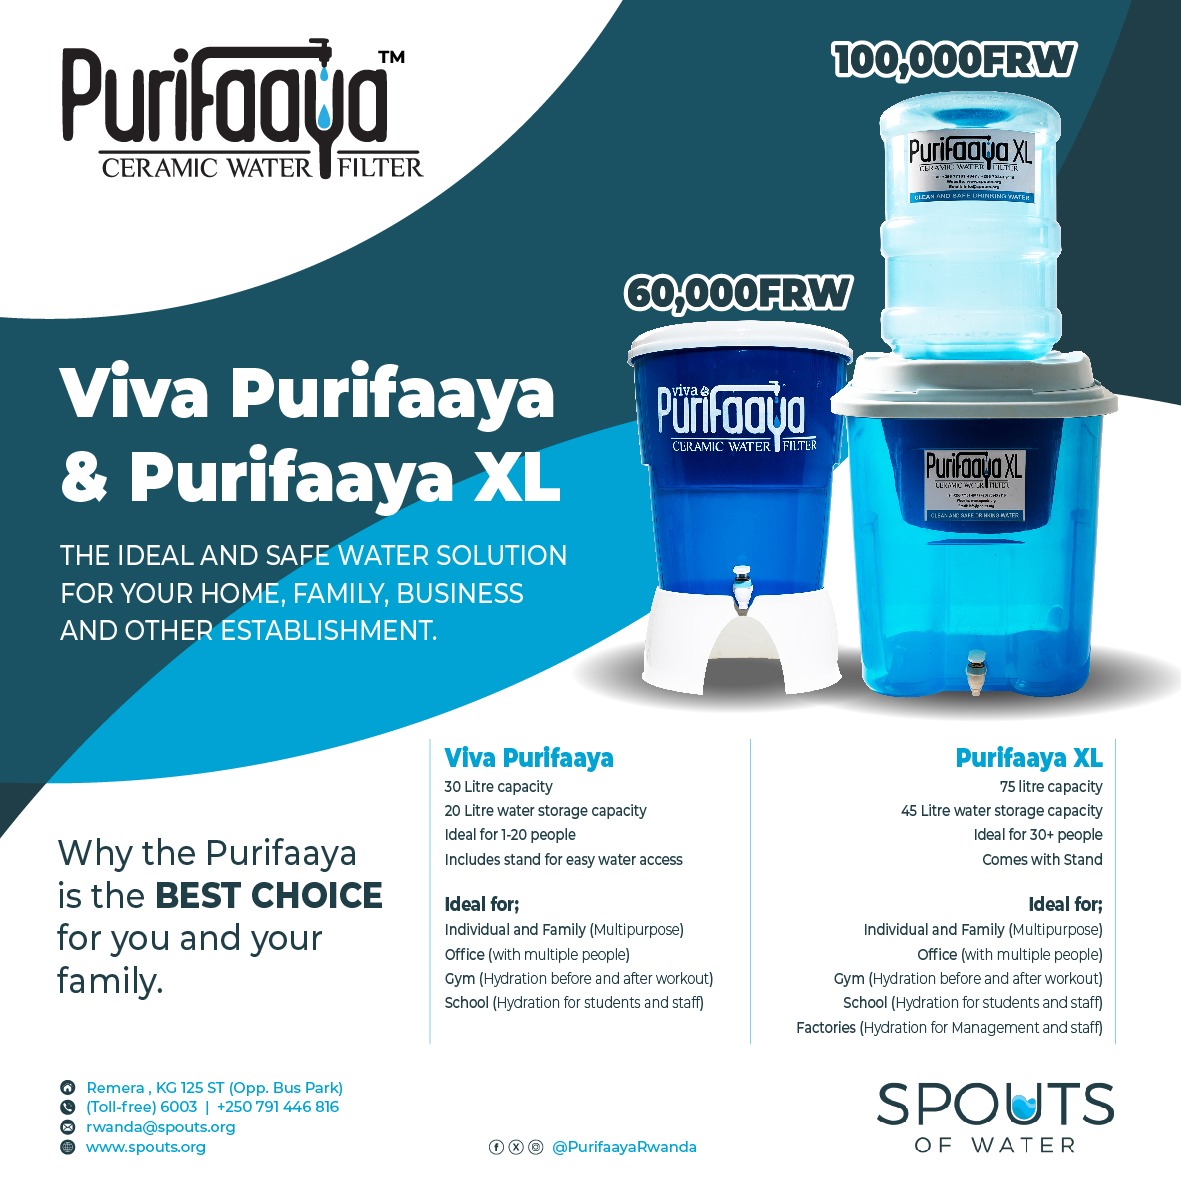 Our multipurpose Viva and Purifaaya XL provide you with a safe, clean solution for your drinking water needs. Order yours today at purifaaya.com, or call 079-144-6816 or our toll-free number 6003.

#choose #purifaaya #ceramic #filters #cleandrinkingwater